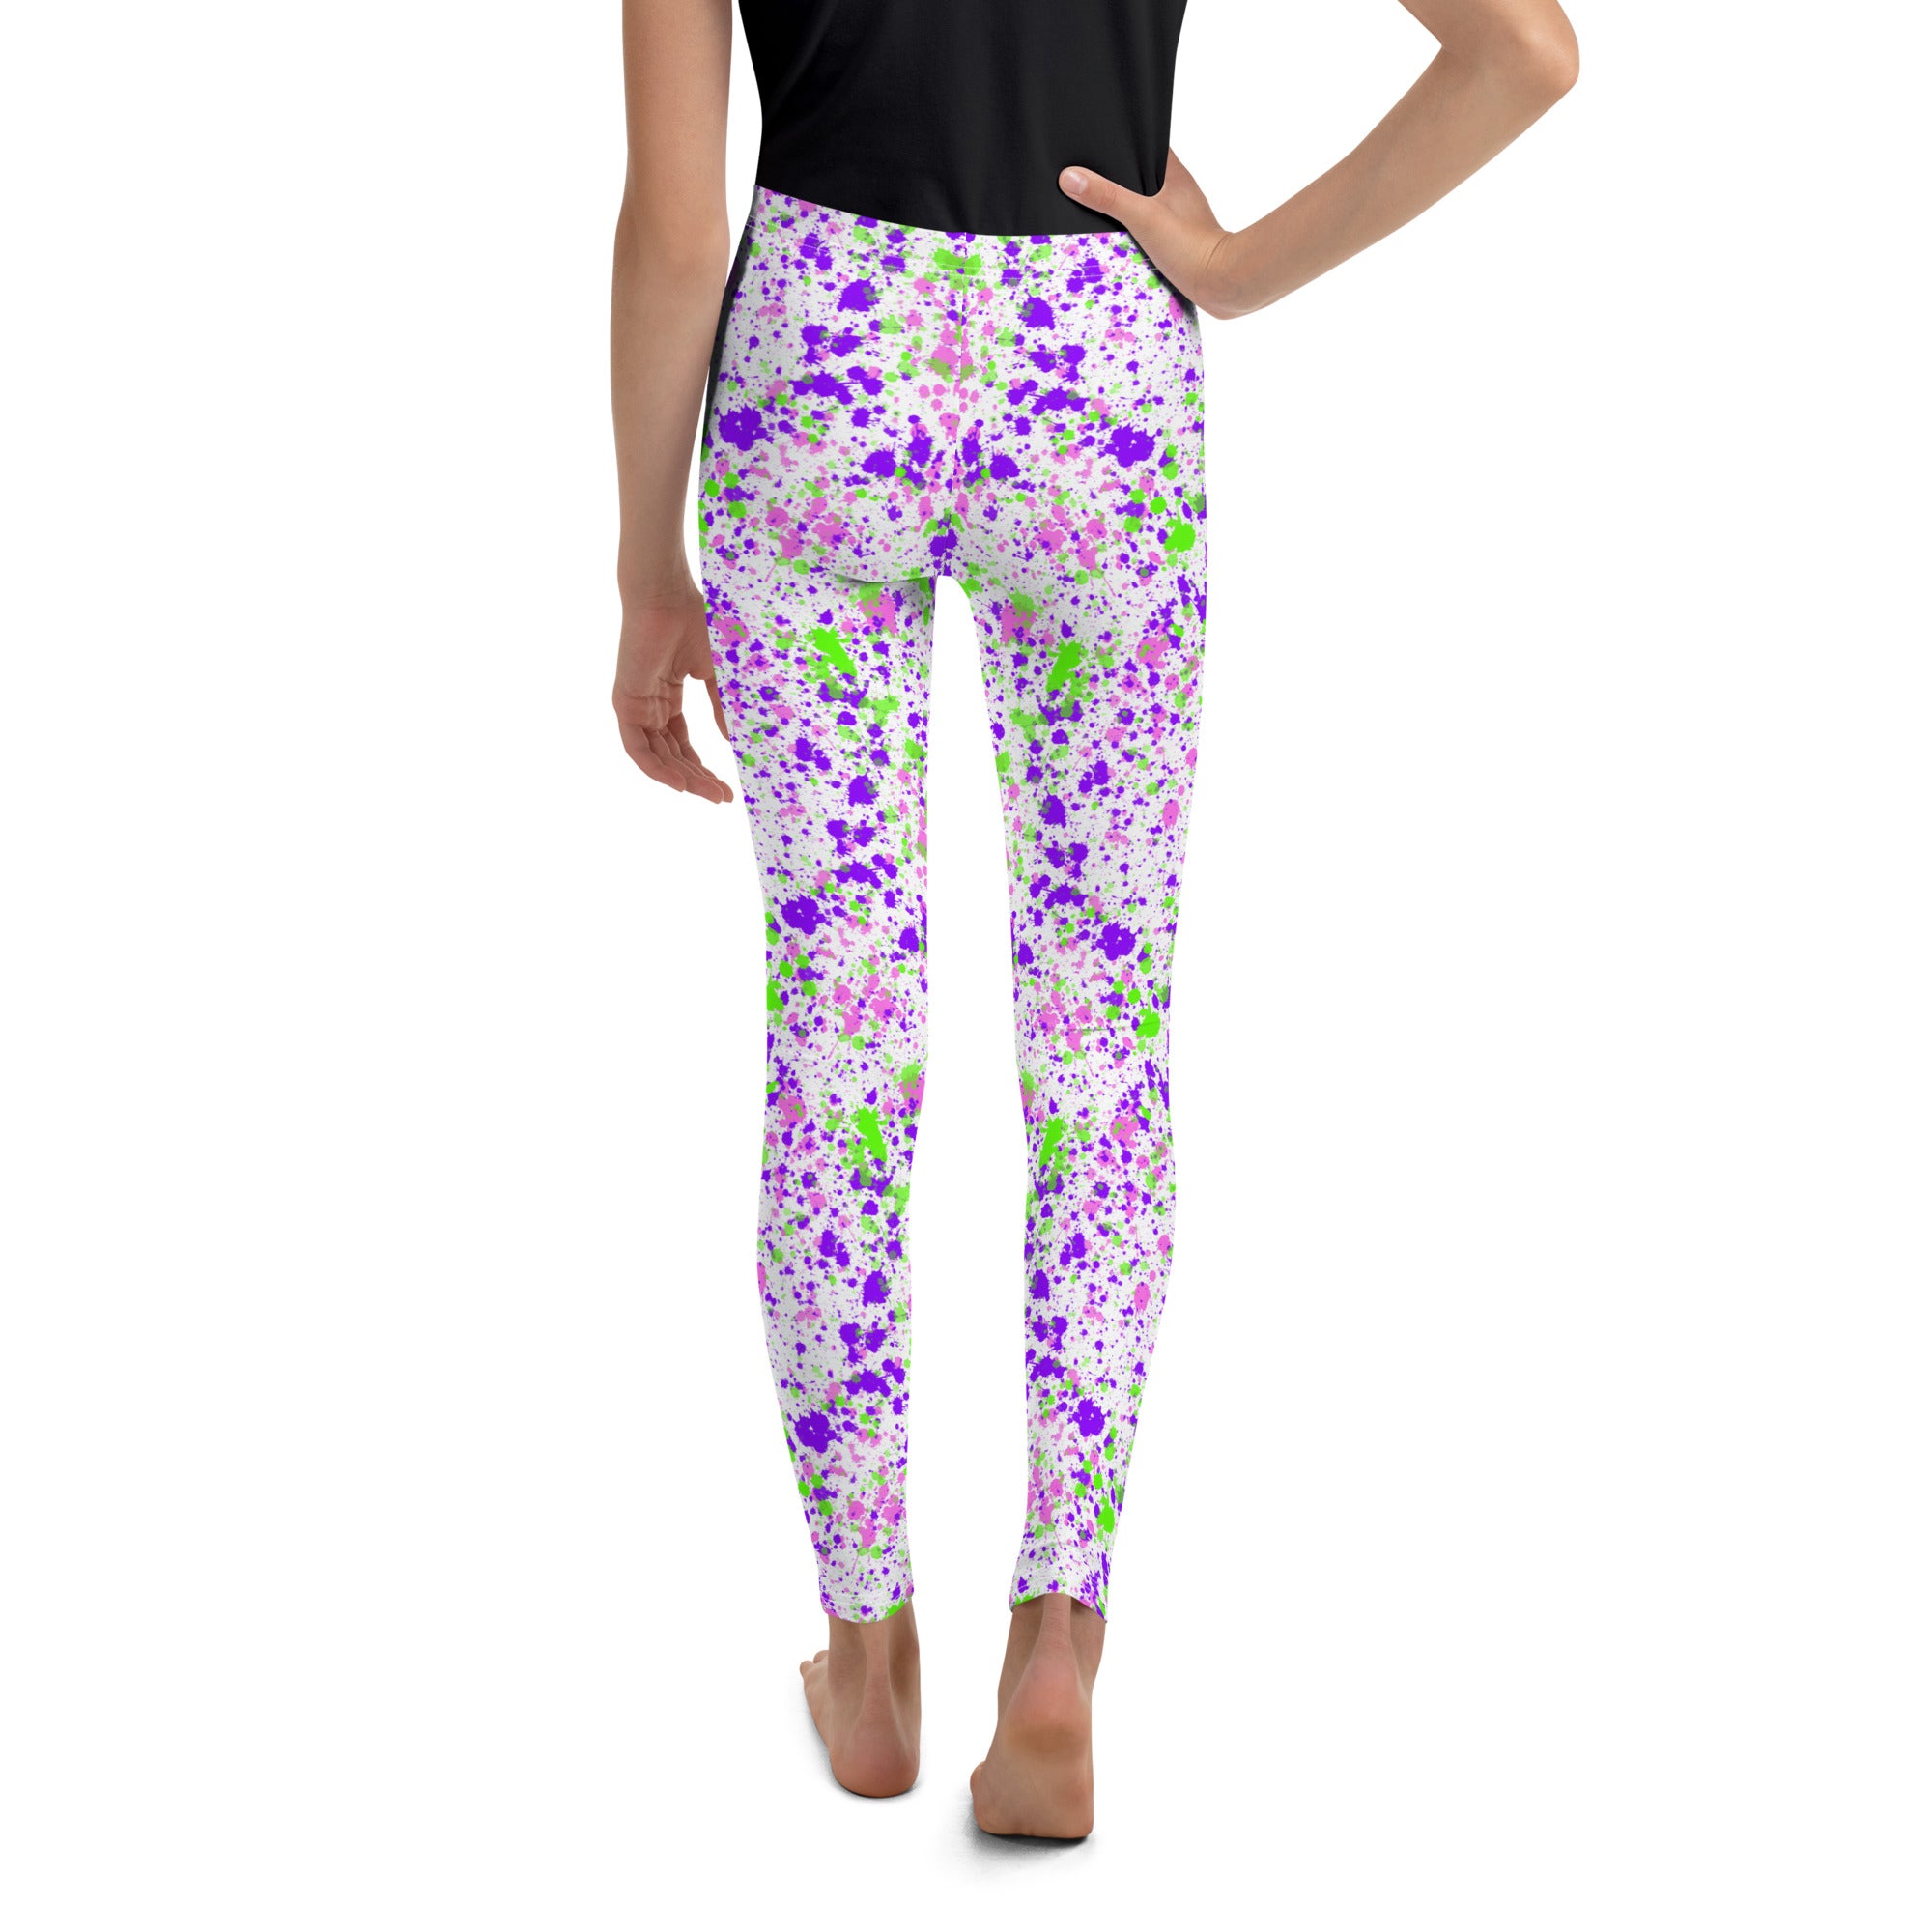 Youth Leggings- Paint splatters Green with Blue